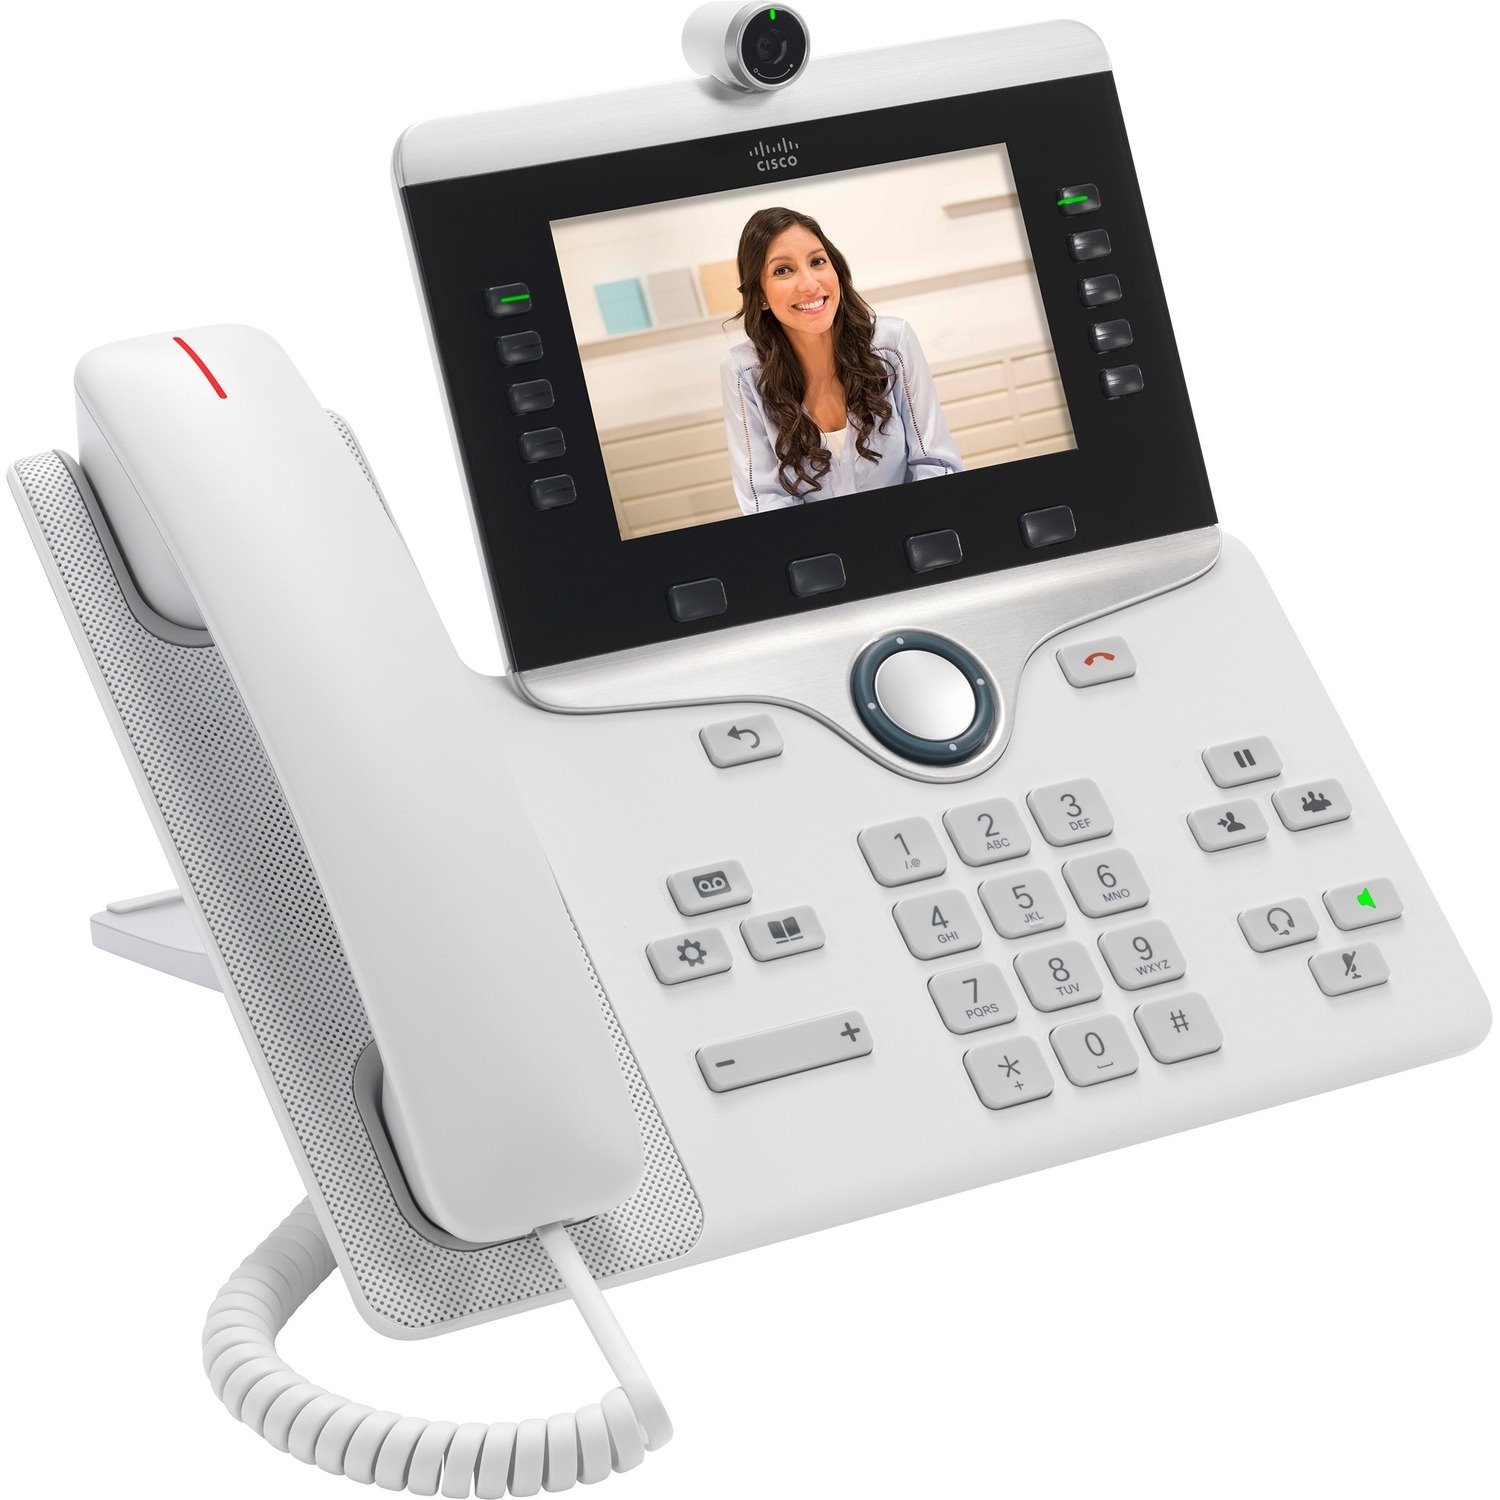 Cisco 8845 IP Phone - Corded/Cordless - Corded - Wall Mountable - White